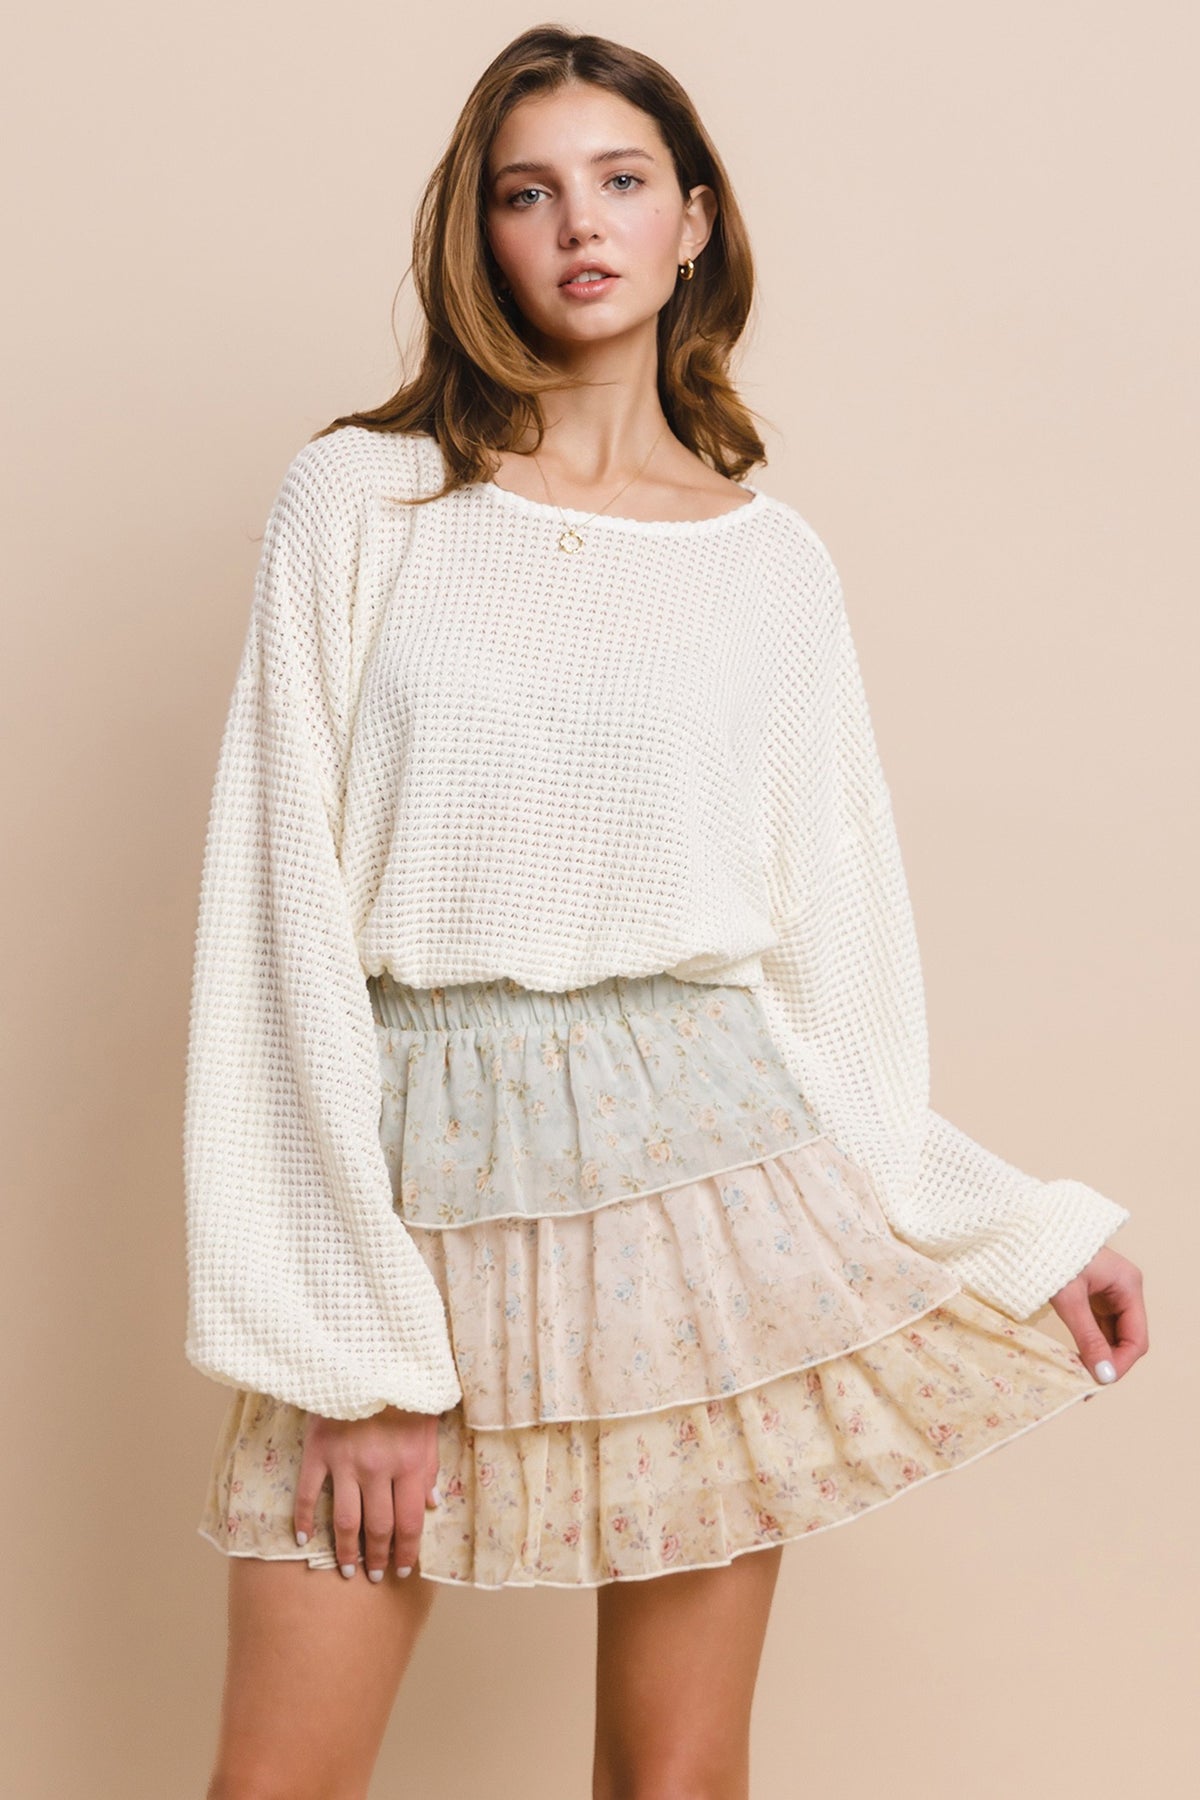 Marie Knit Top